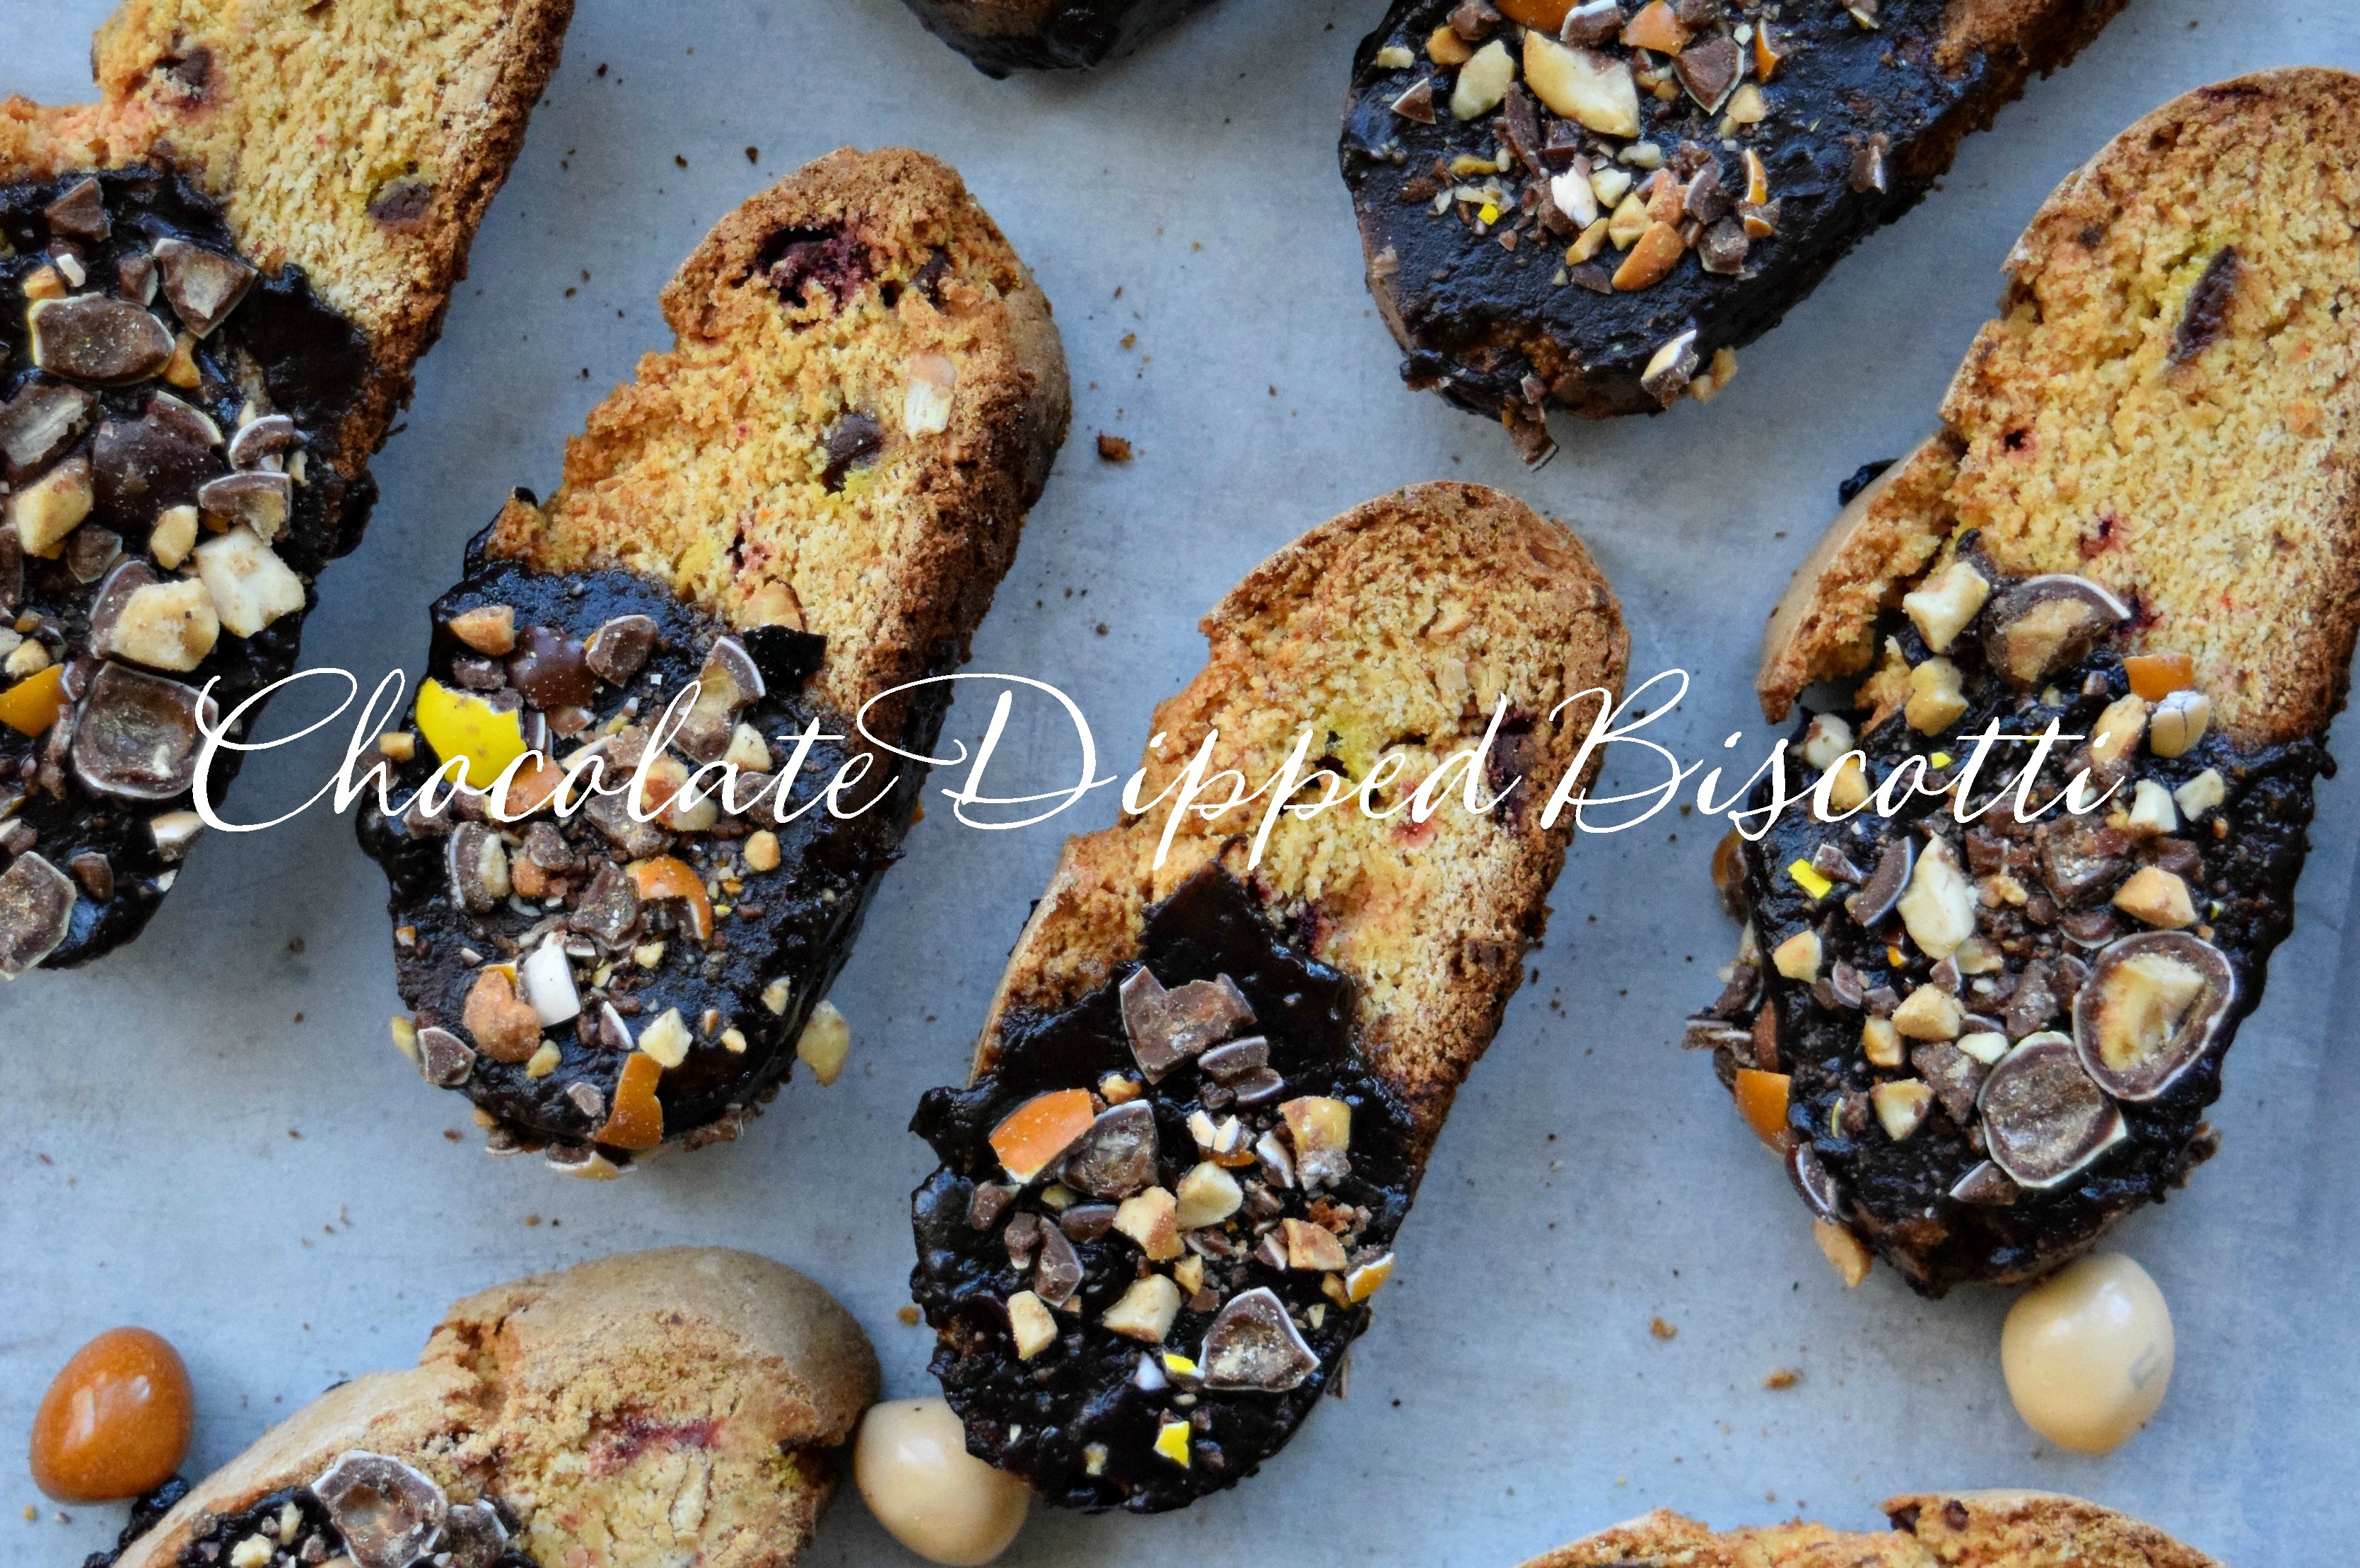 Living the Gourmet: Chocolate Dipped Biscotti